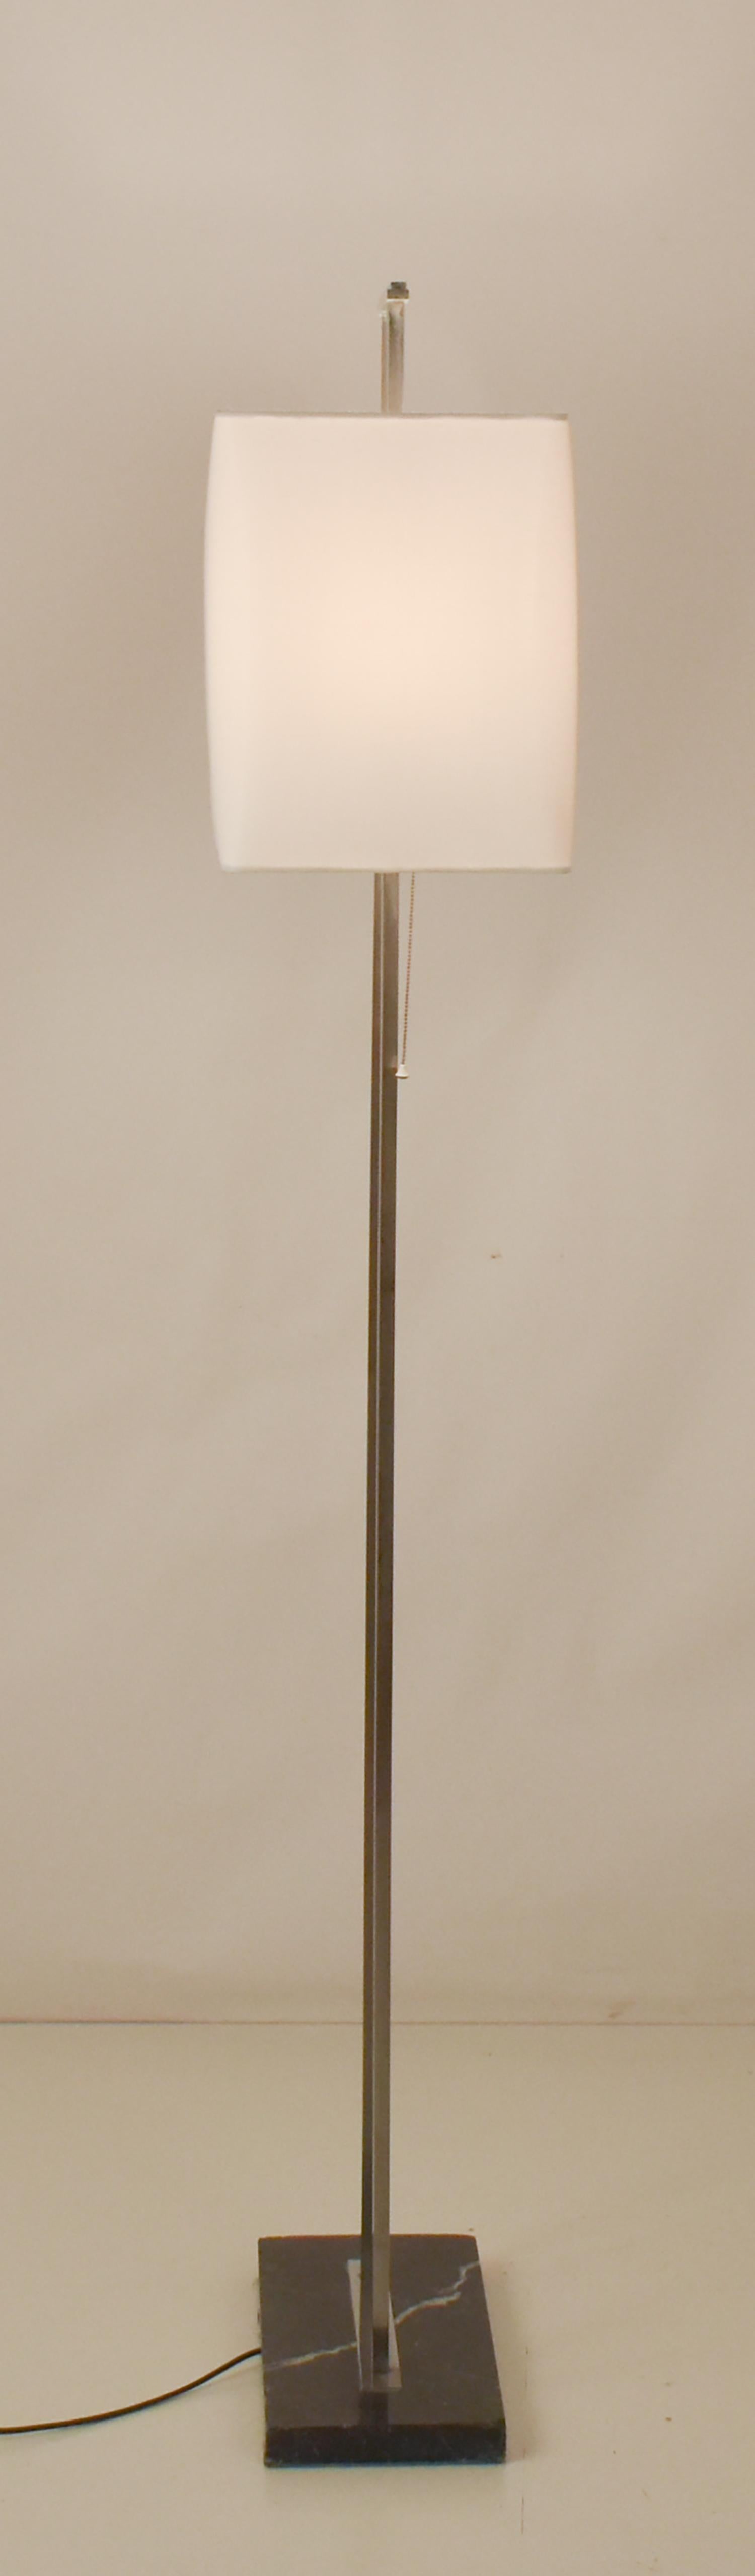 Mid-20th Century Mid - century floor lamp, base in black marble and chromed metal structure. For Sale